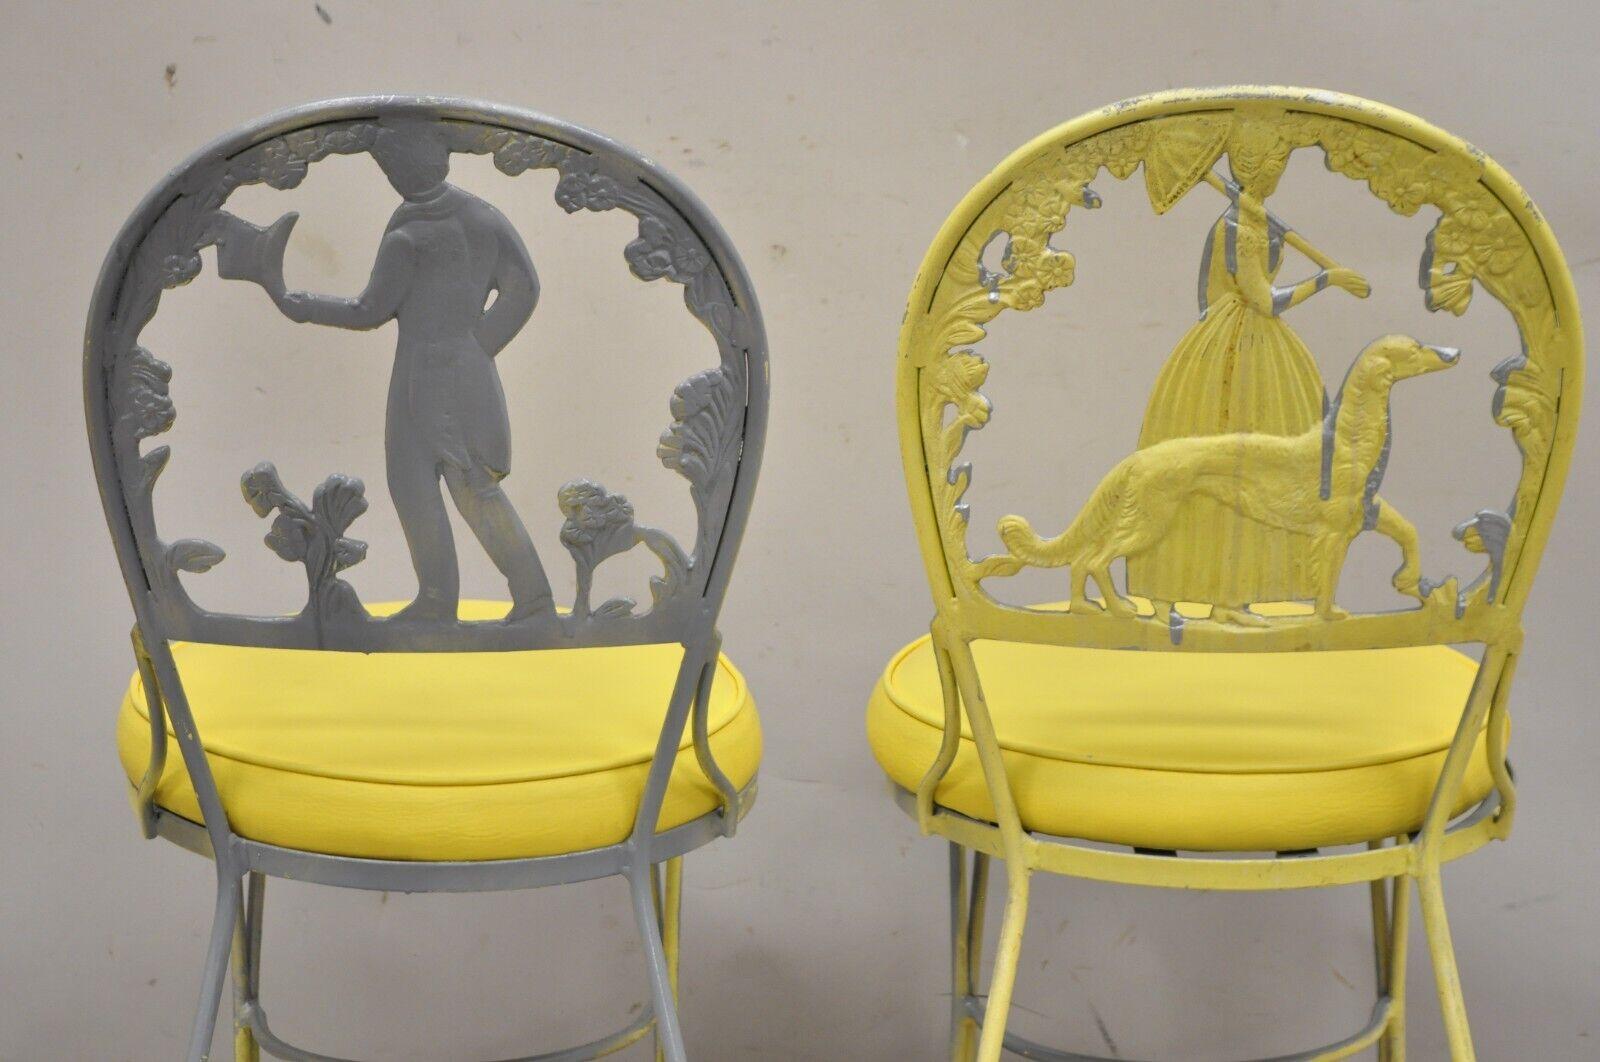 Victorian Style Cast Aluminum Courting Scene Garden Patio Bistro Chairs - a Pair For Sale 6